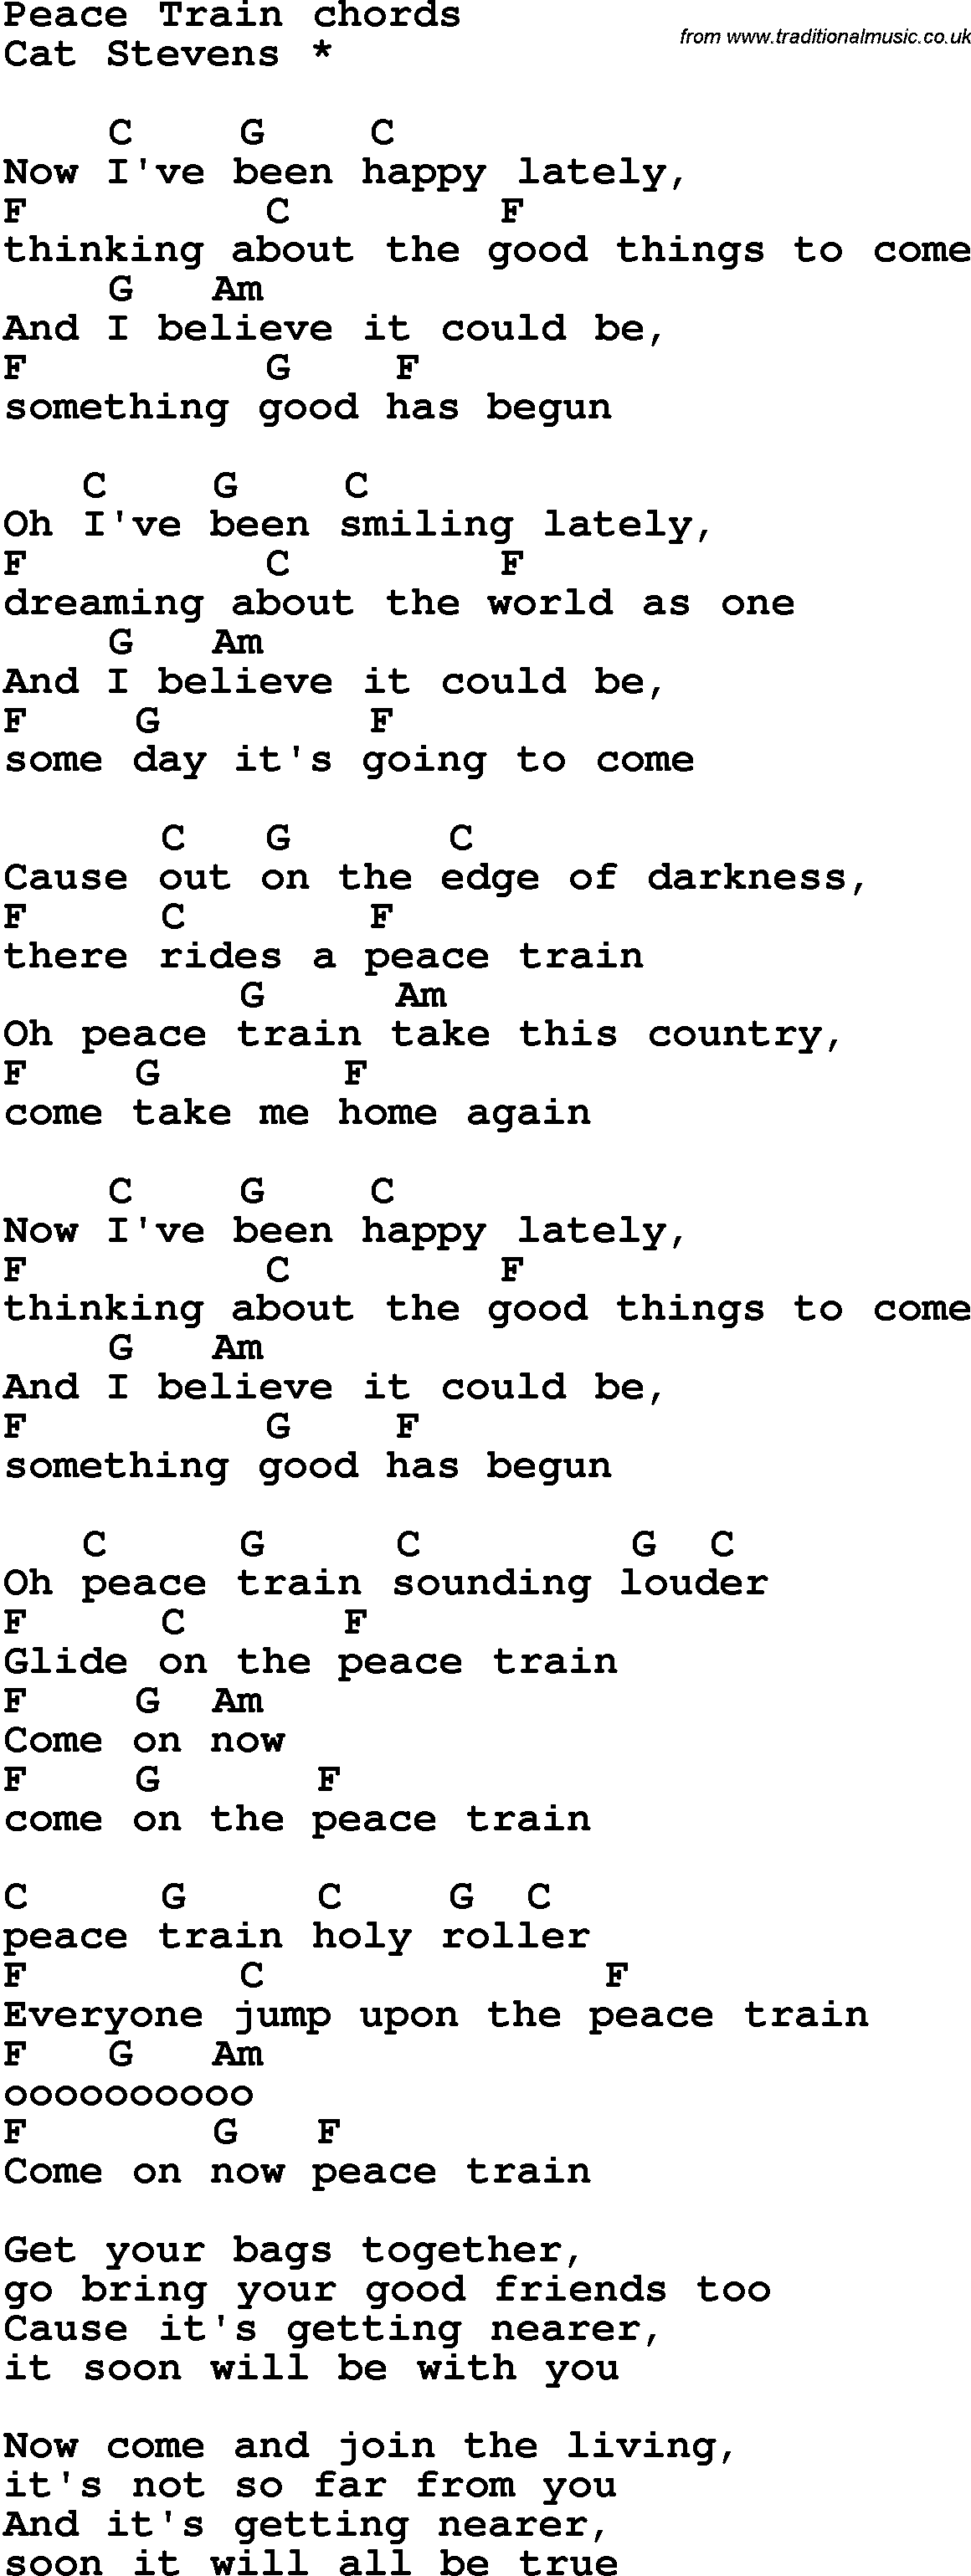 Song Lyrics with guitar chords for Peace Train